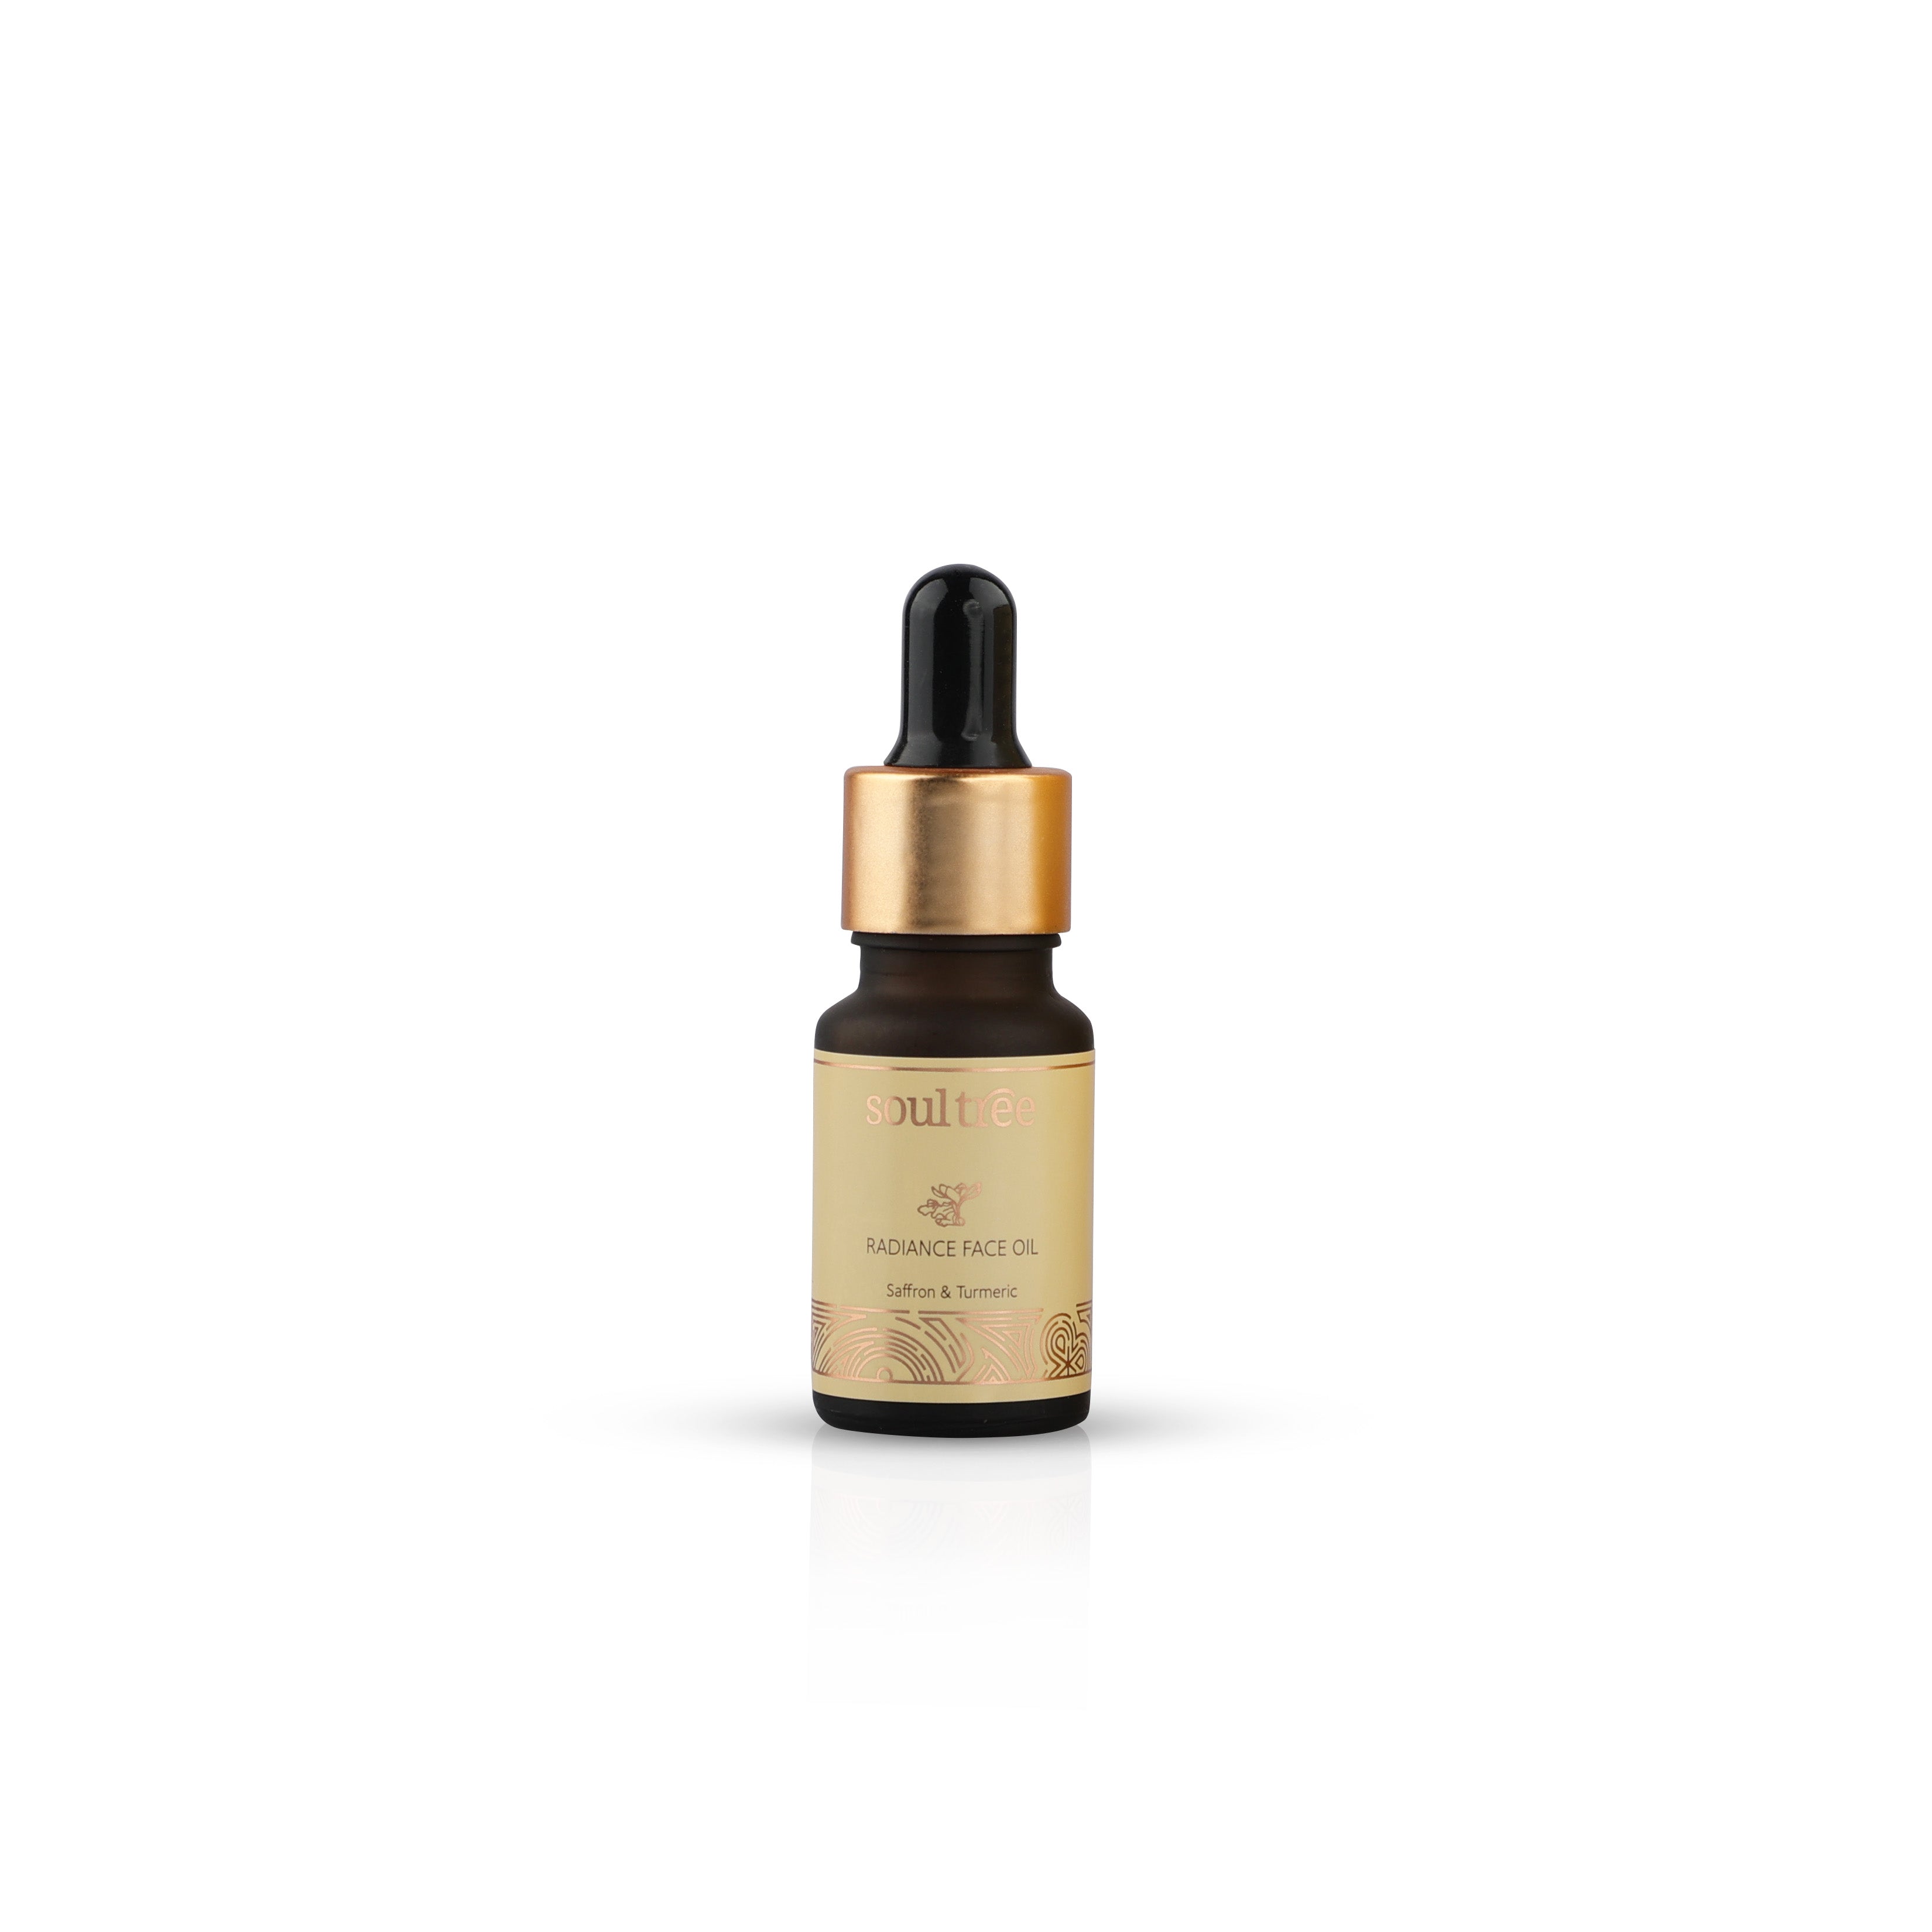 Radiance Face Oil with Saffron & Turmeric - SoulTree